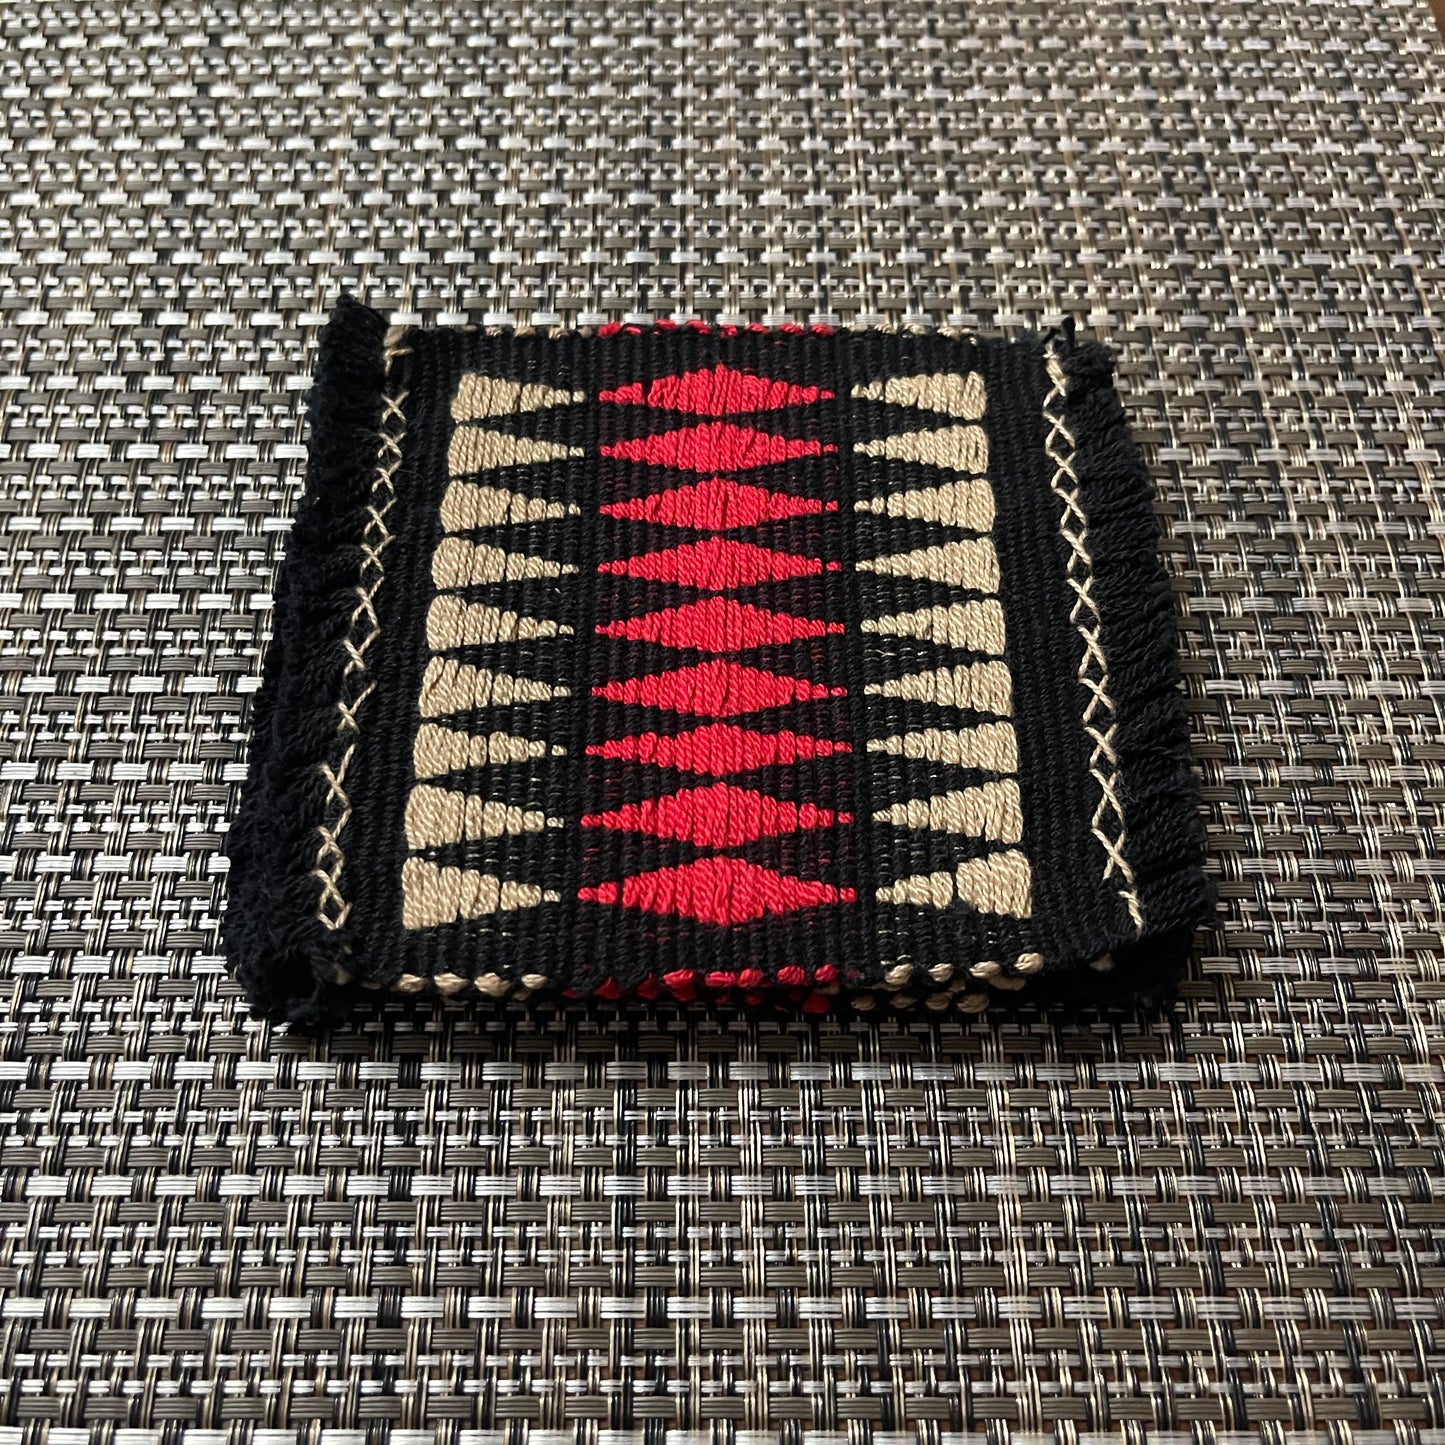 Chizami Weaves - Handwoven Coasters (Set of 6)